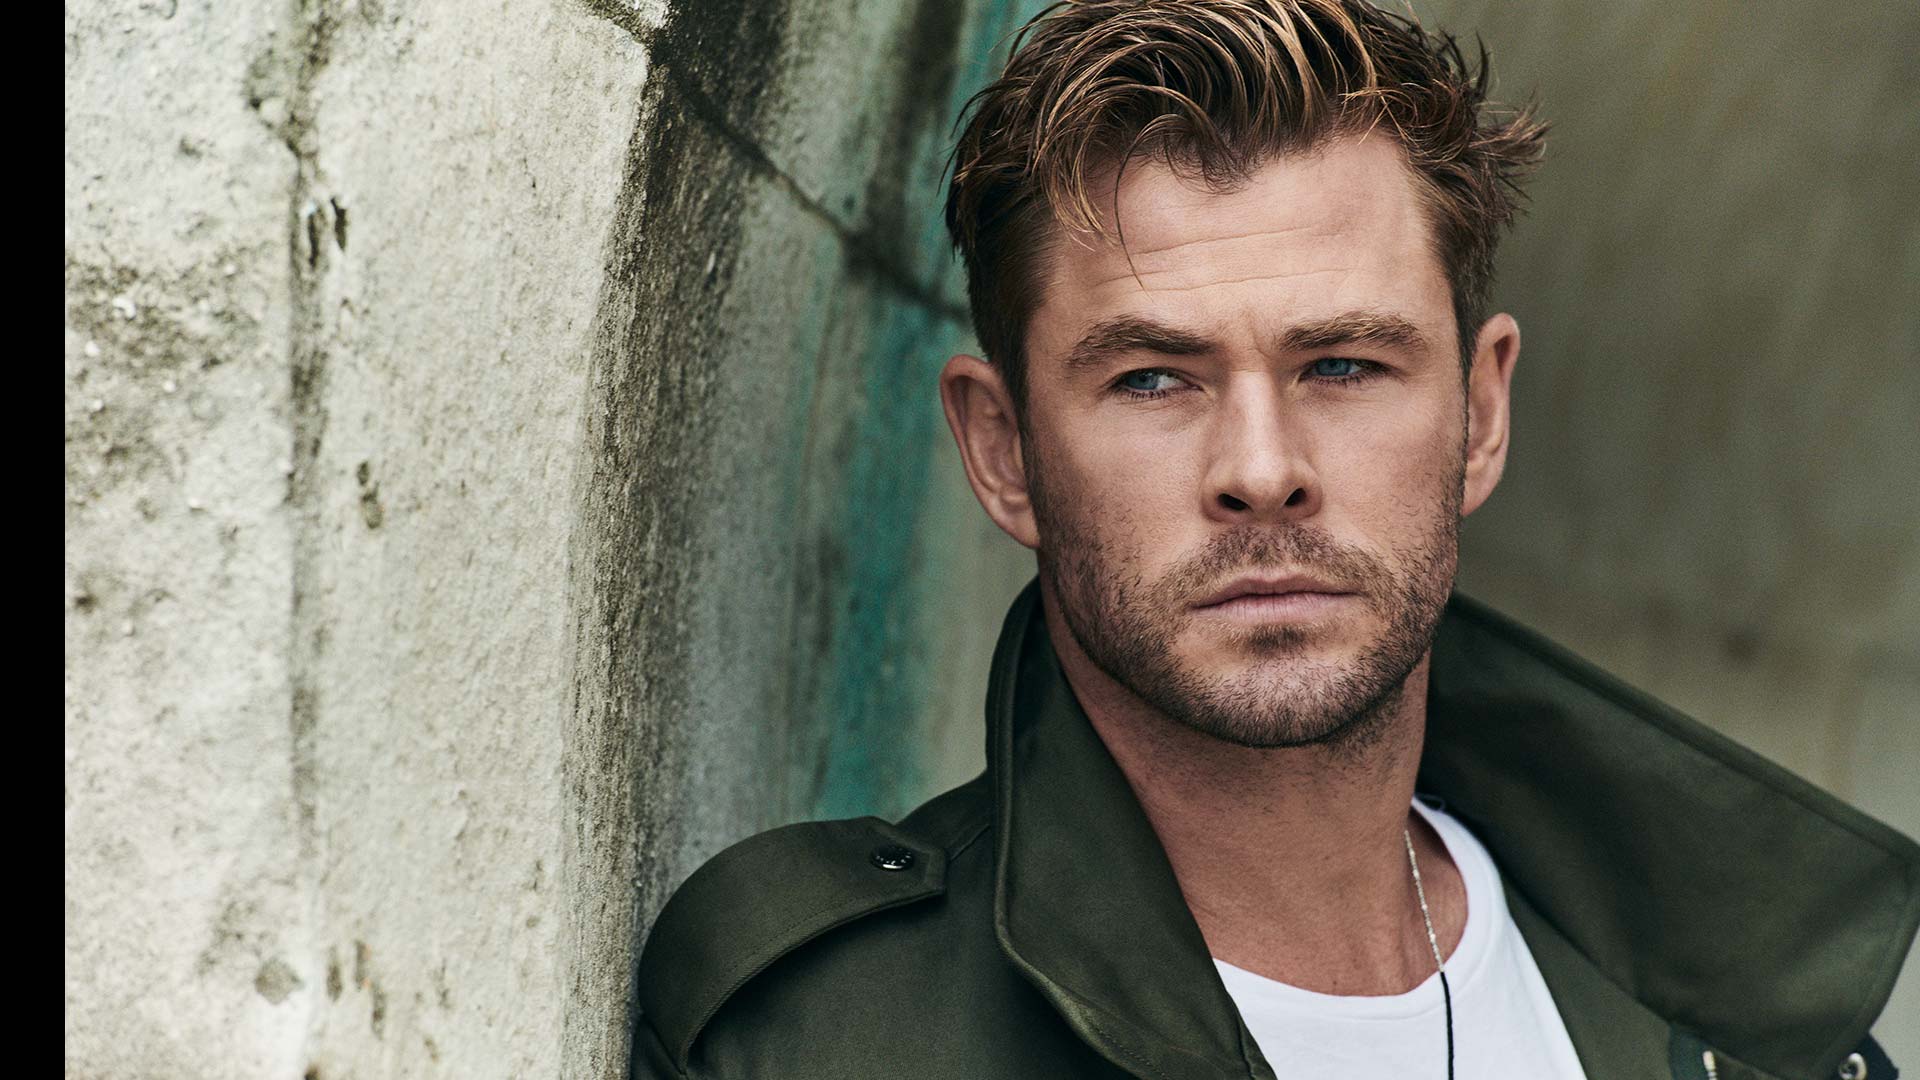 Chris Hemsworth is the superhero, the man and the father we would all like to be